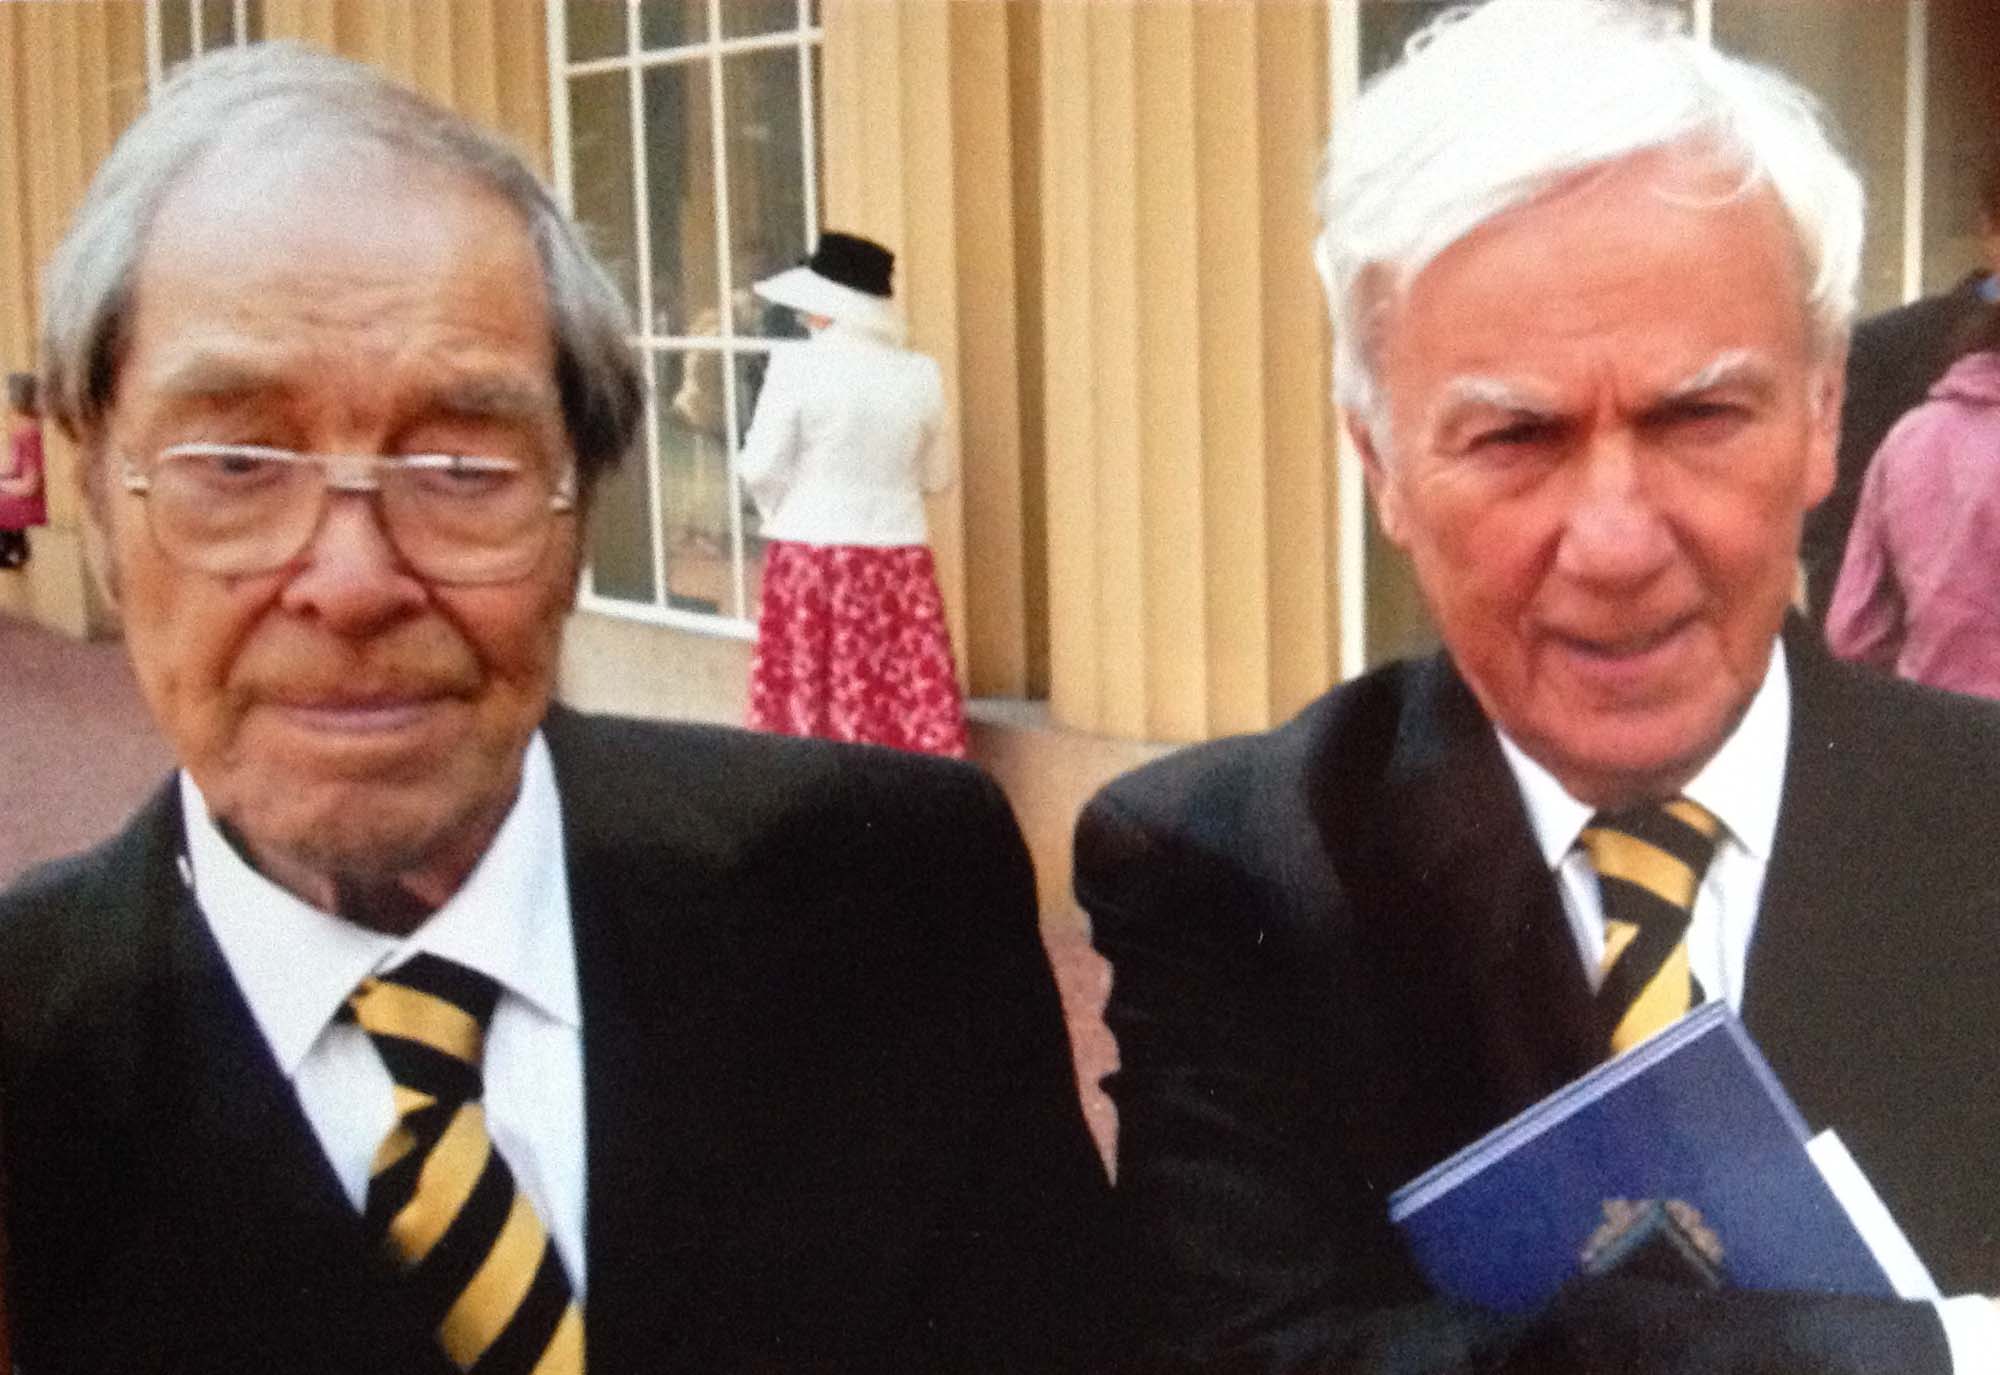 George Daniels and David Newman at Buckingham Palace in 2010